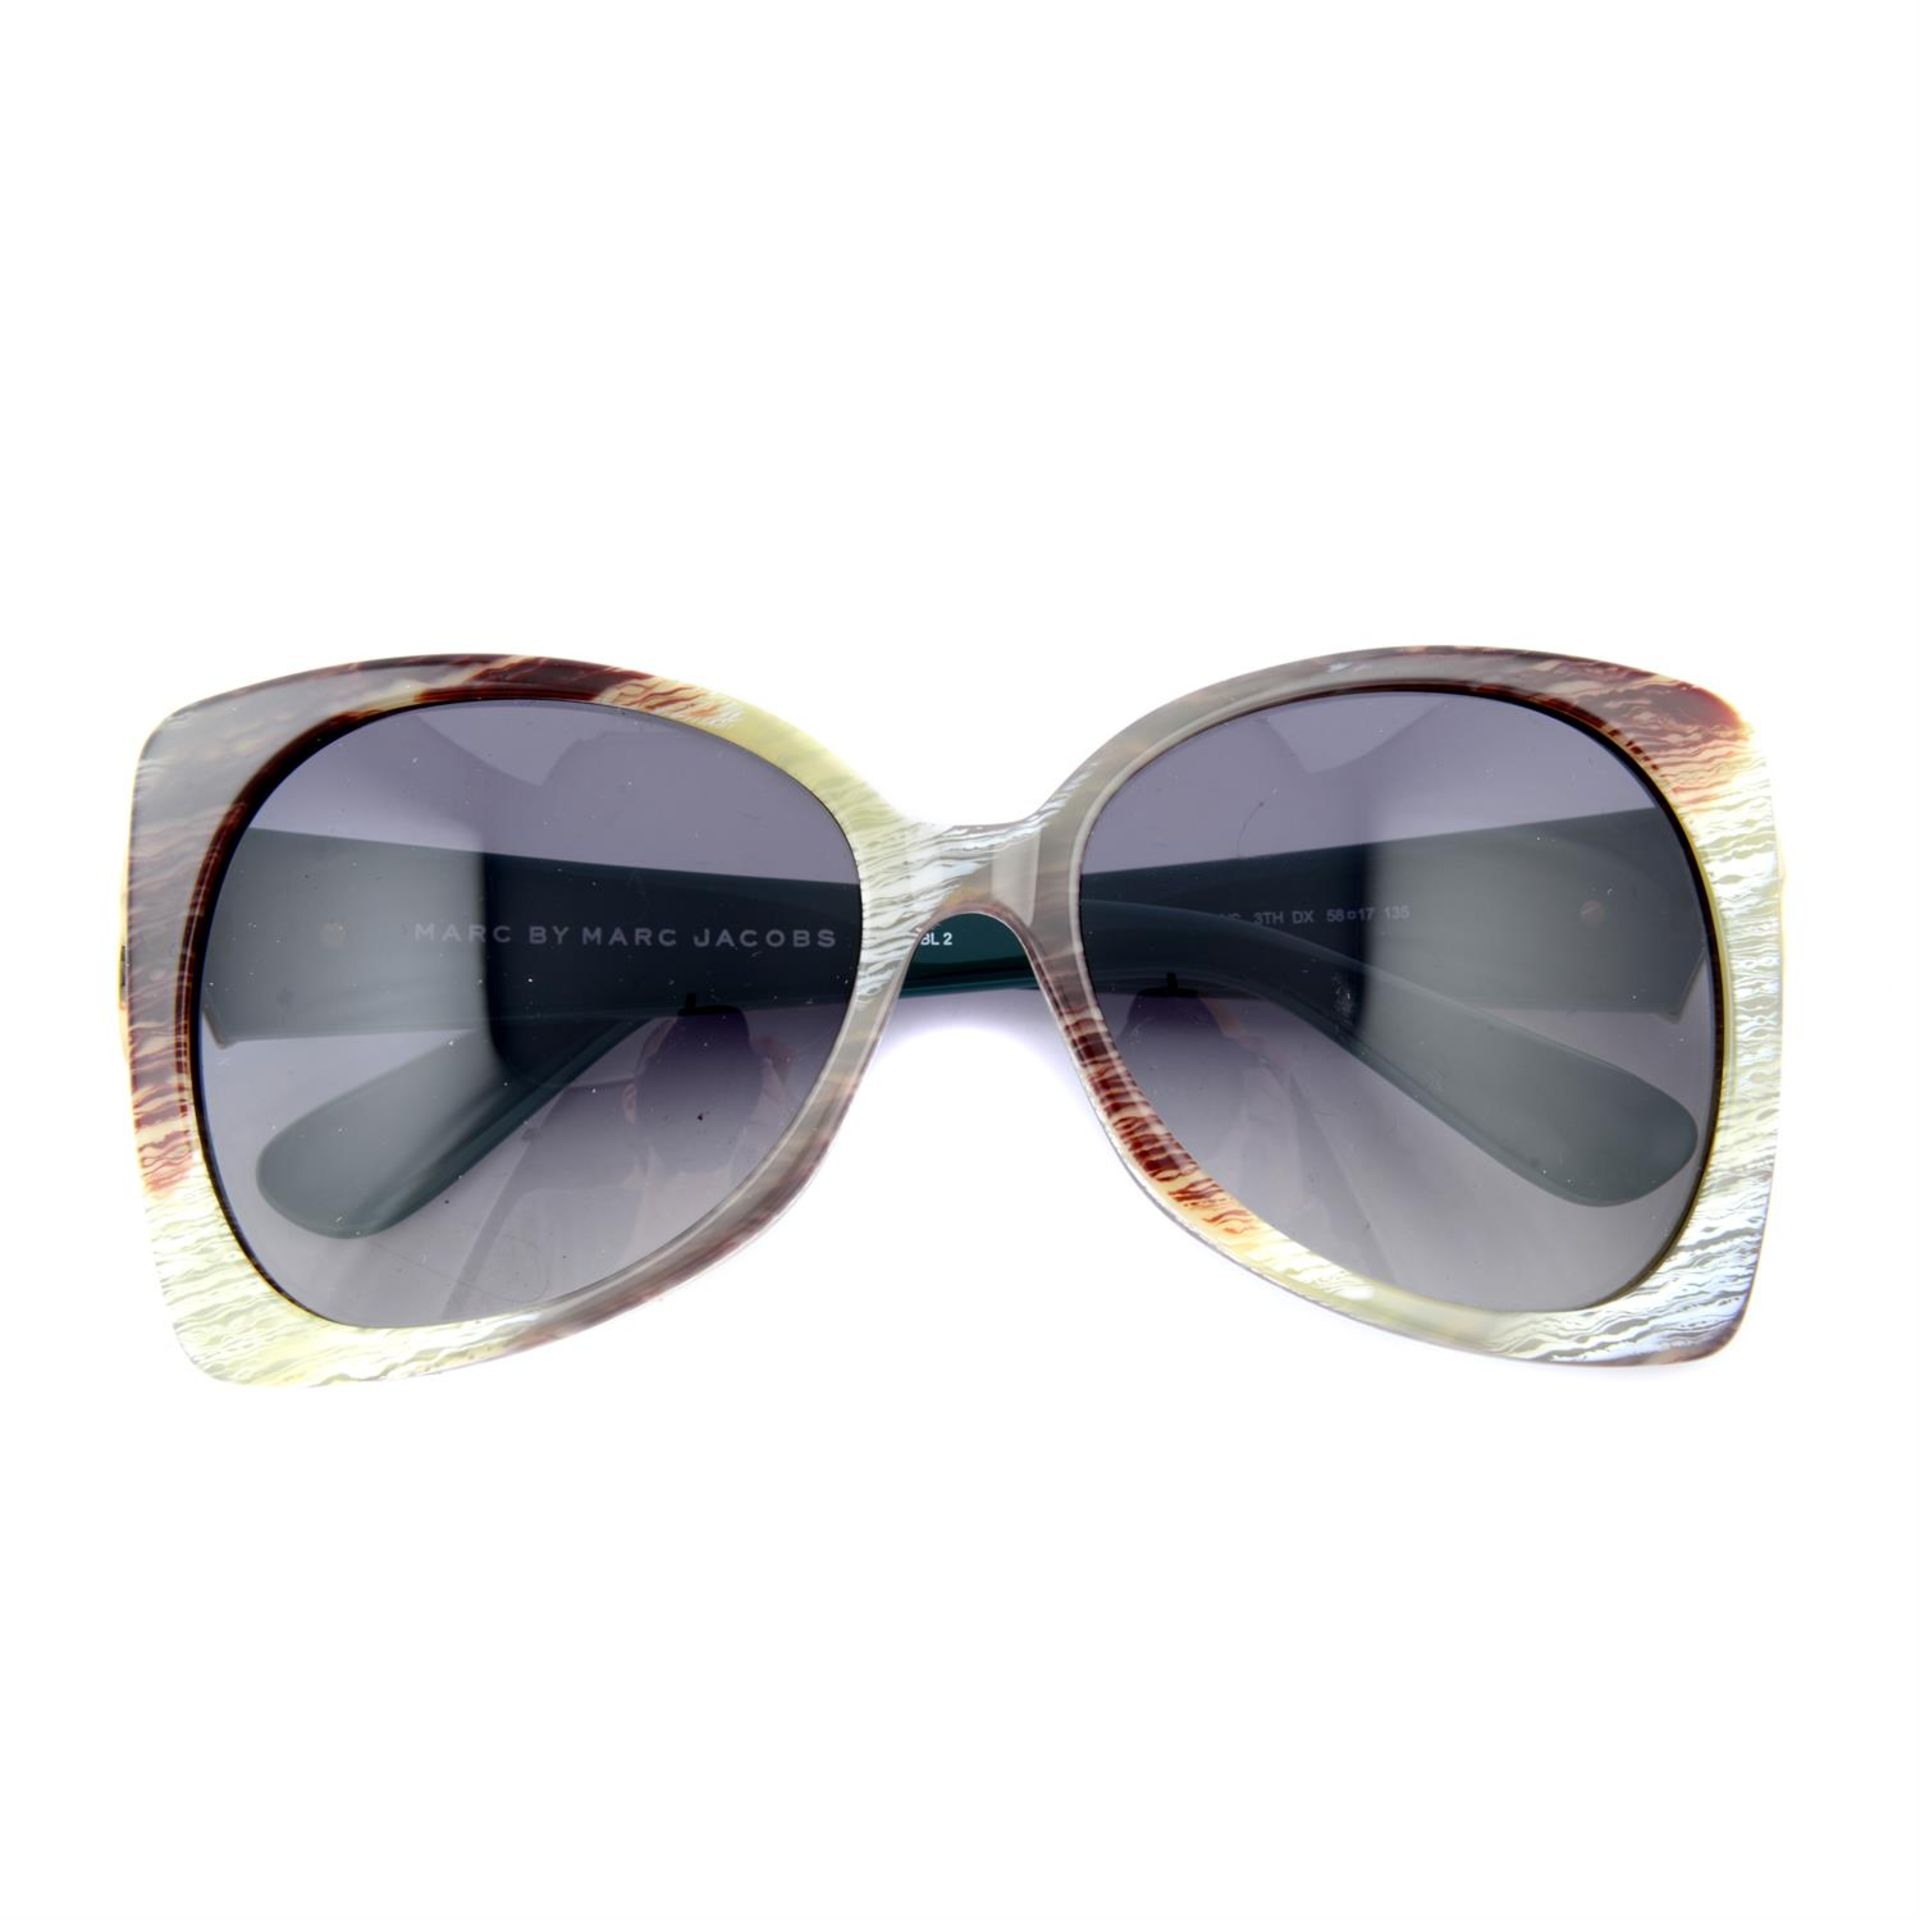 MARC JACOBS - a pair of Marc By Marc Jacobs sunglasses.